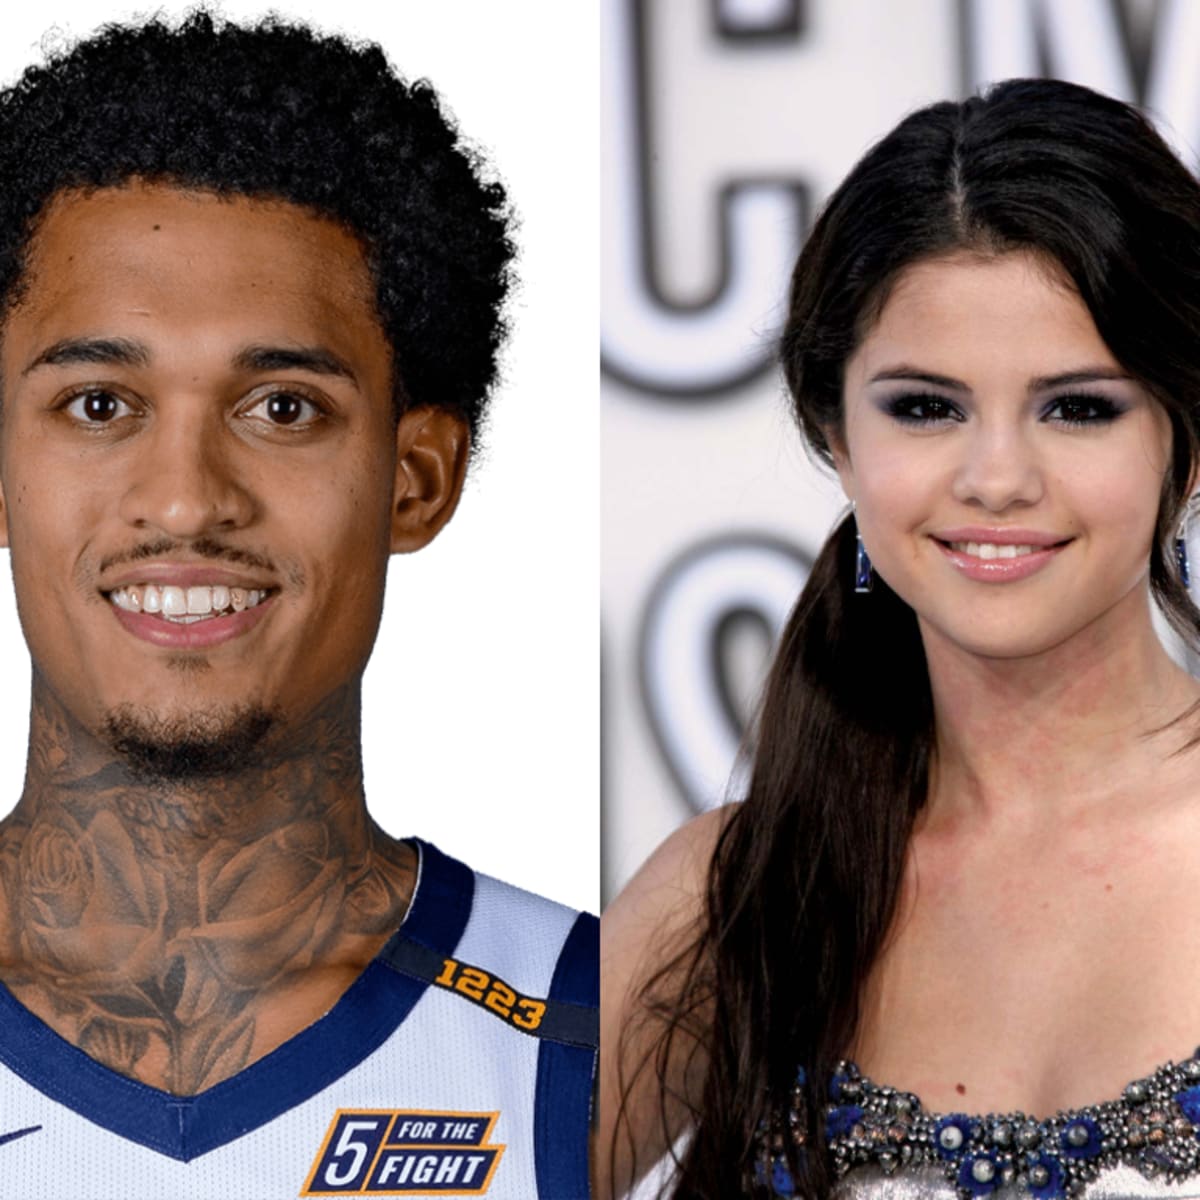 Abbreviation virtual Instruct Jordan Clarkson Shoots His Shot With Selena Gomez: "This Man Dated Kendal  Jenner, Bella Hadid And Is Going For The Three-Peat. A Pure Scorer." -  Fadeaway World